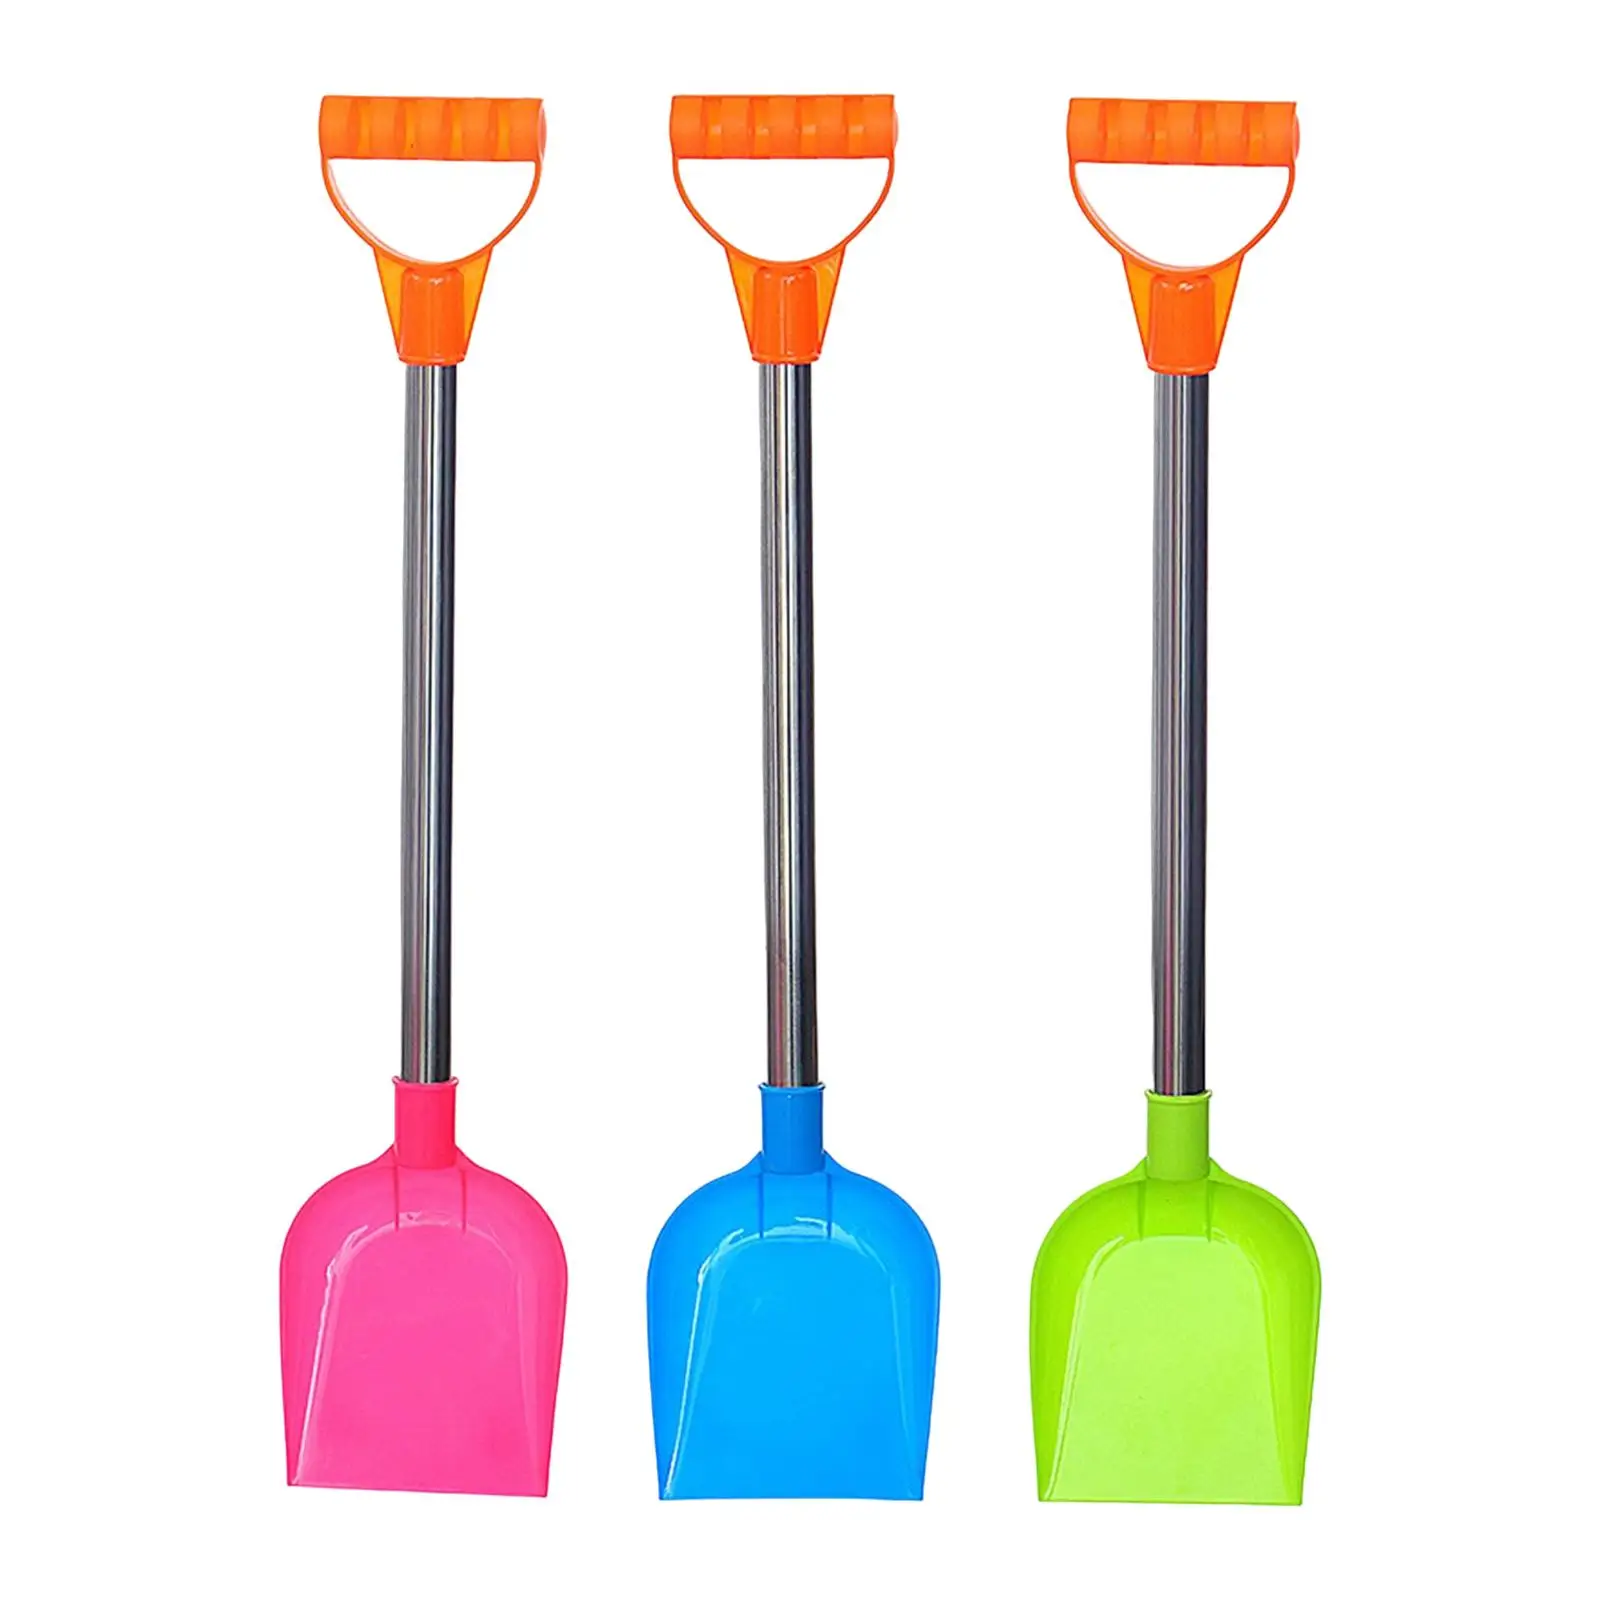 3 Pieces Beach Sand Toys Set Gardening Tool for Outdoor Indoor Sea Toddlers